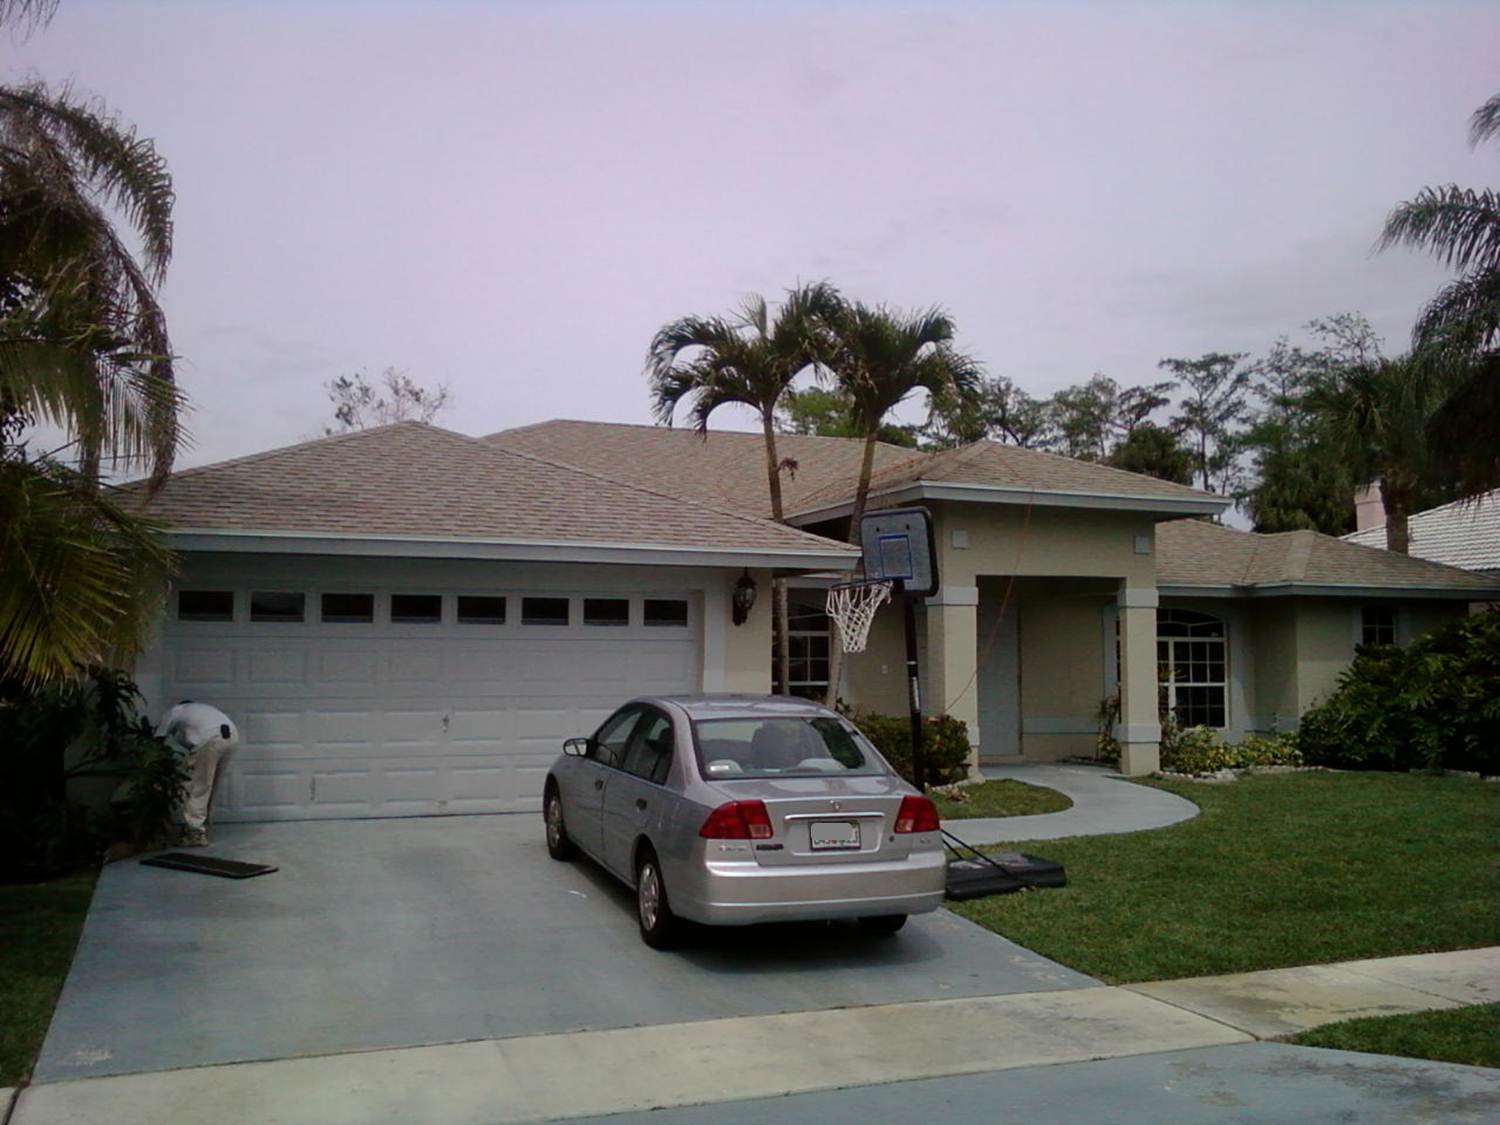 ABA Customs, Inc. 3 Dimensional Shingle Re-Roof Project in Wellington, Florida!